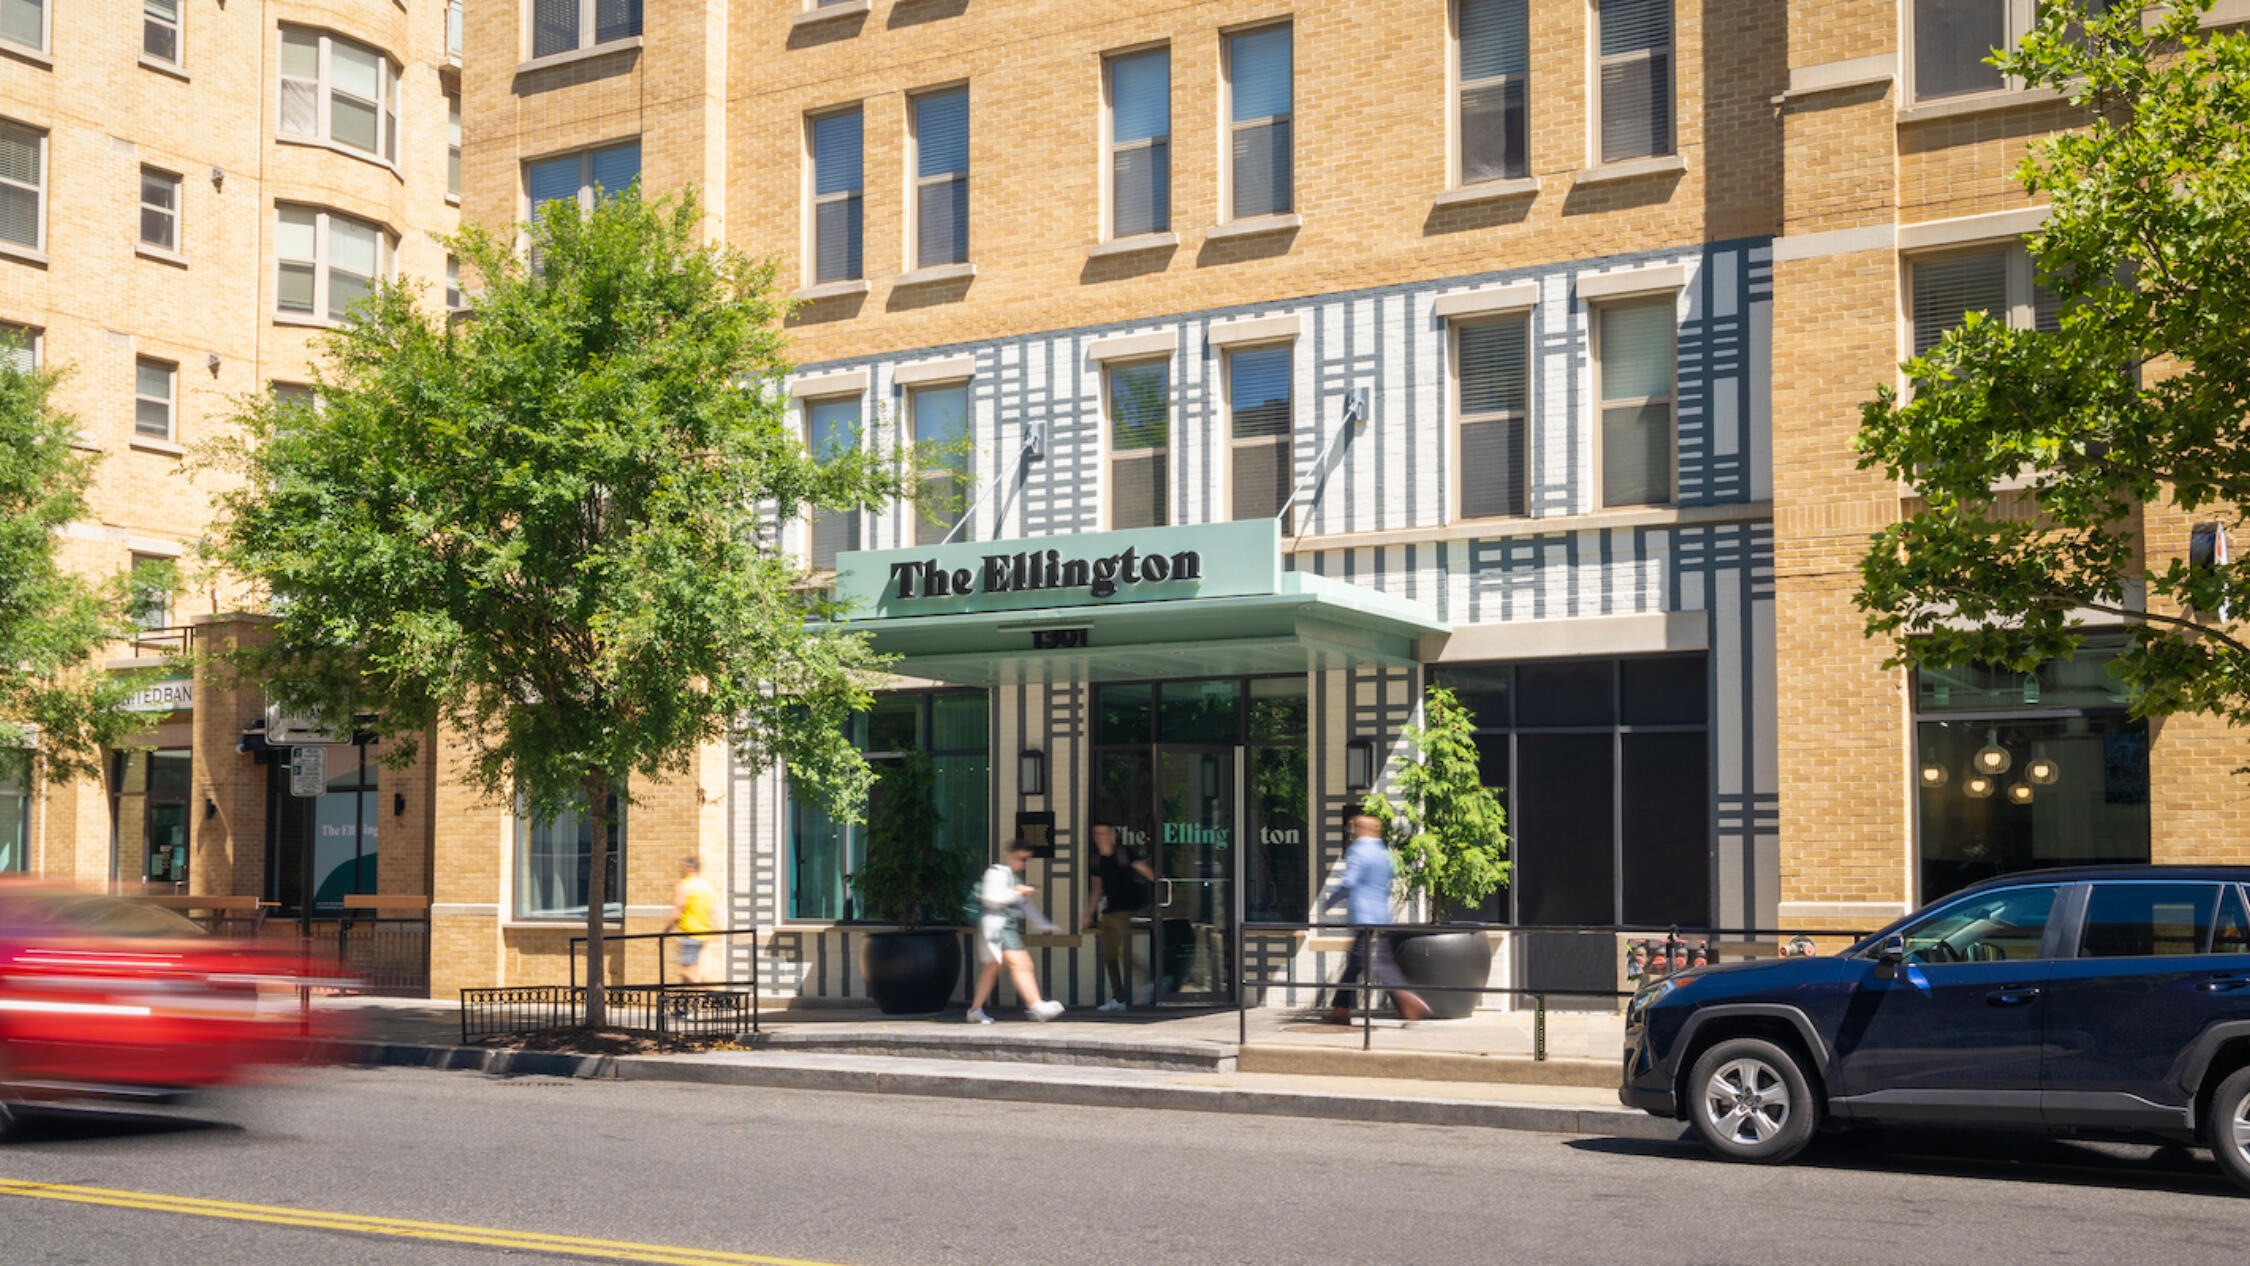 The exterior of The Ellington with people walking by